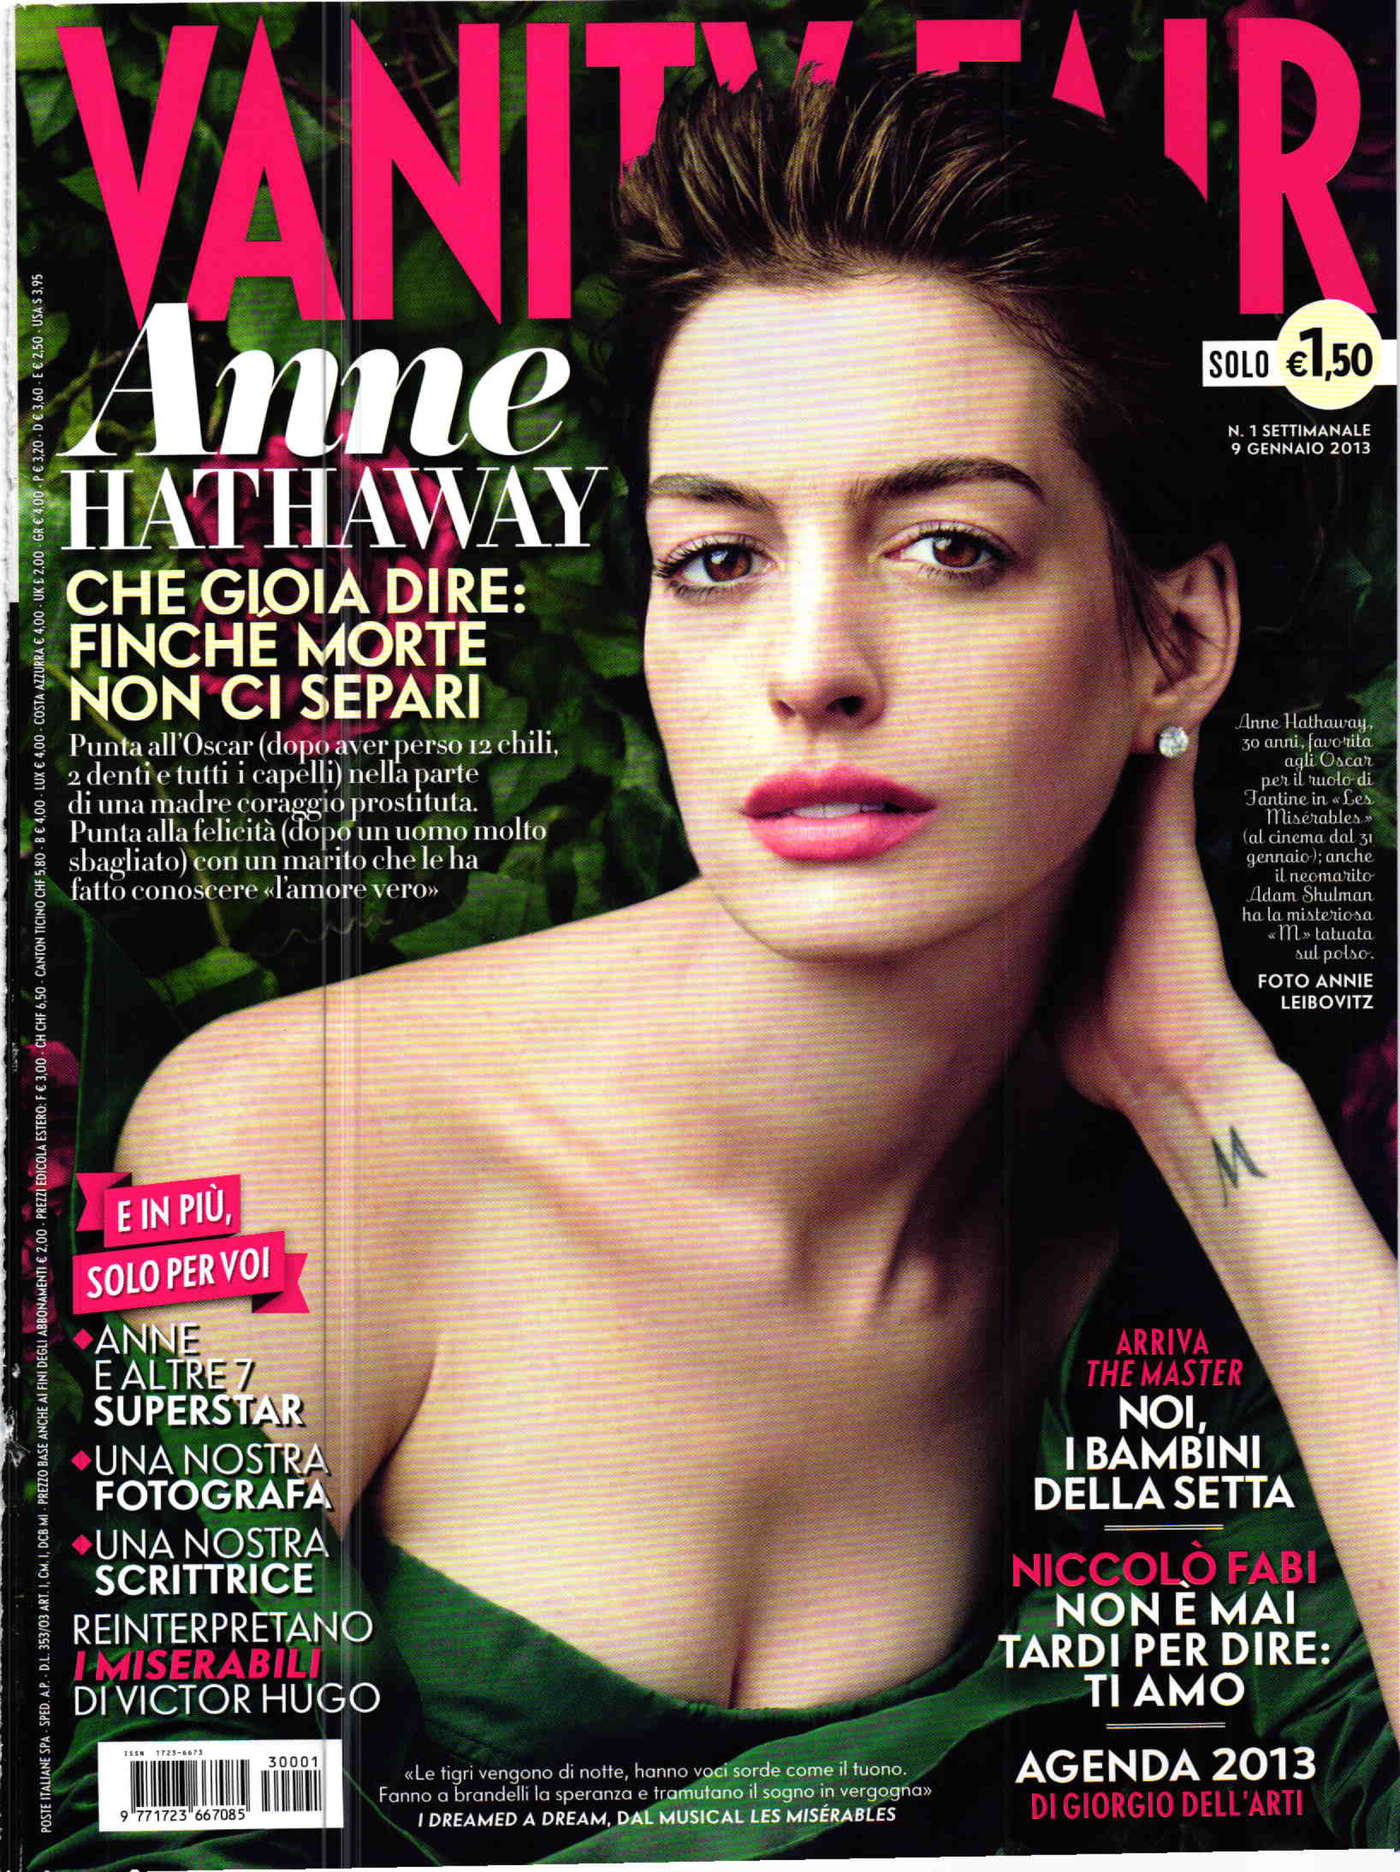 Anne Hathaway - Photoshoot/Interview in Vanity Fair (Italy), January 2013